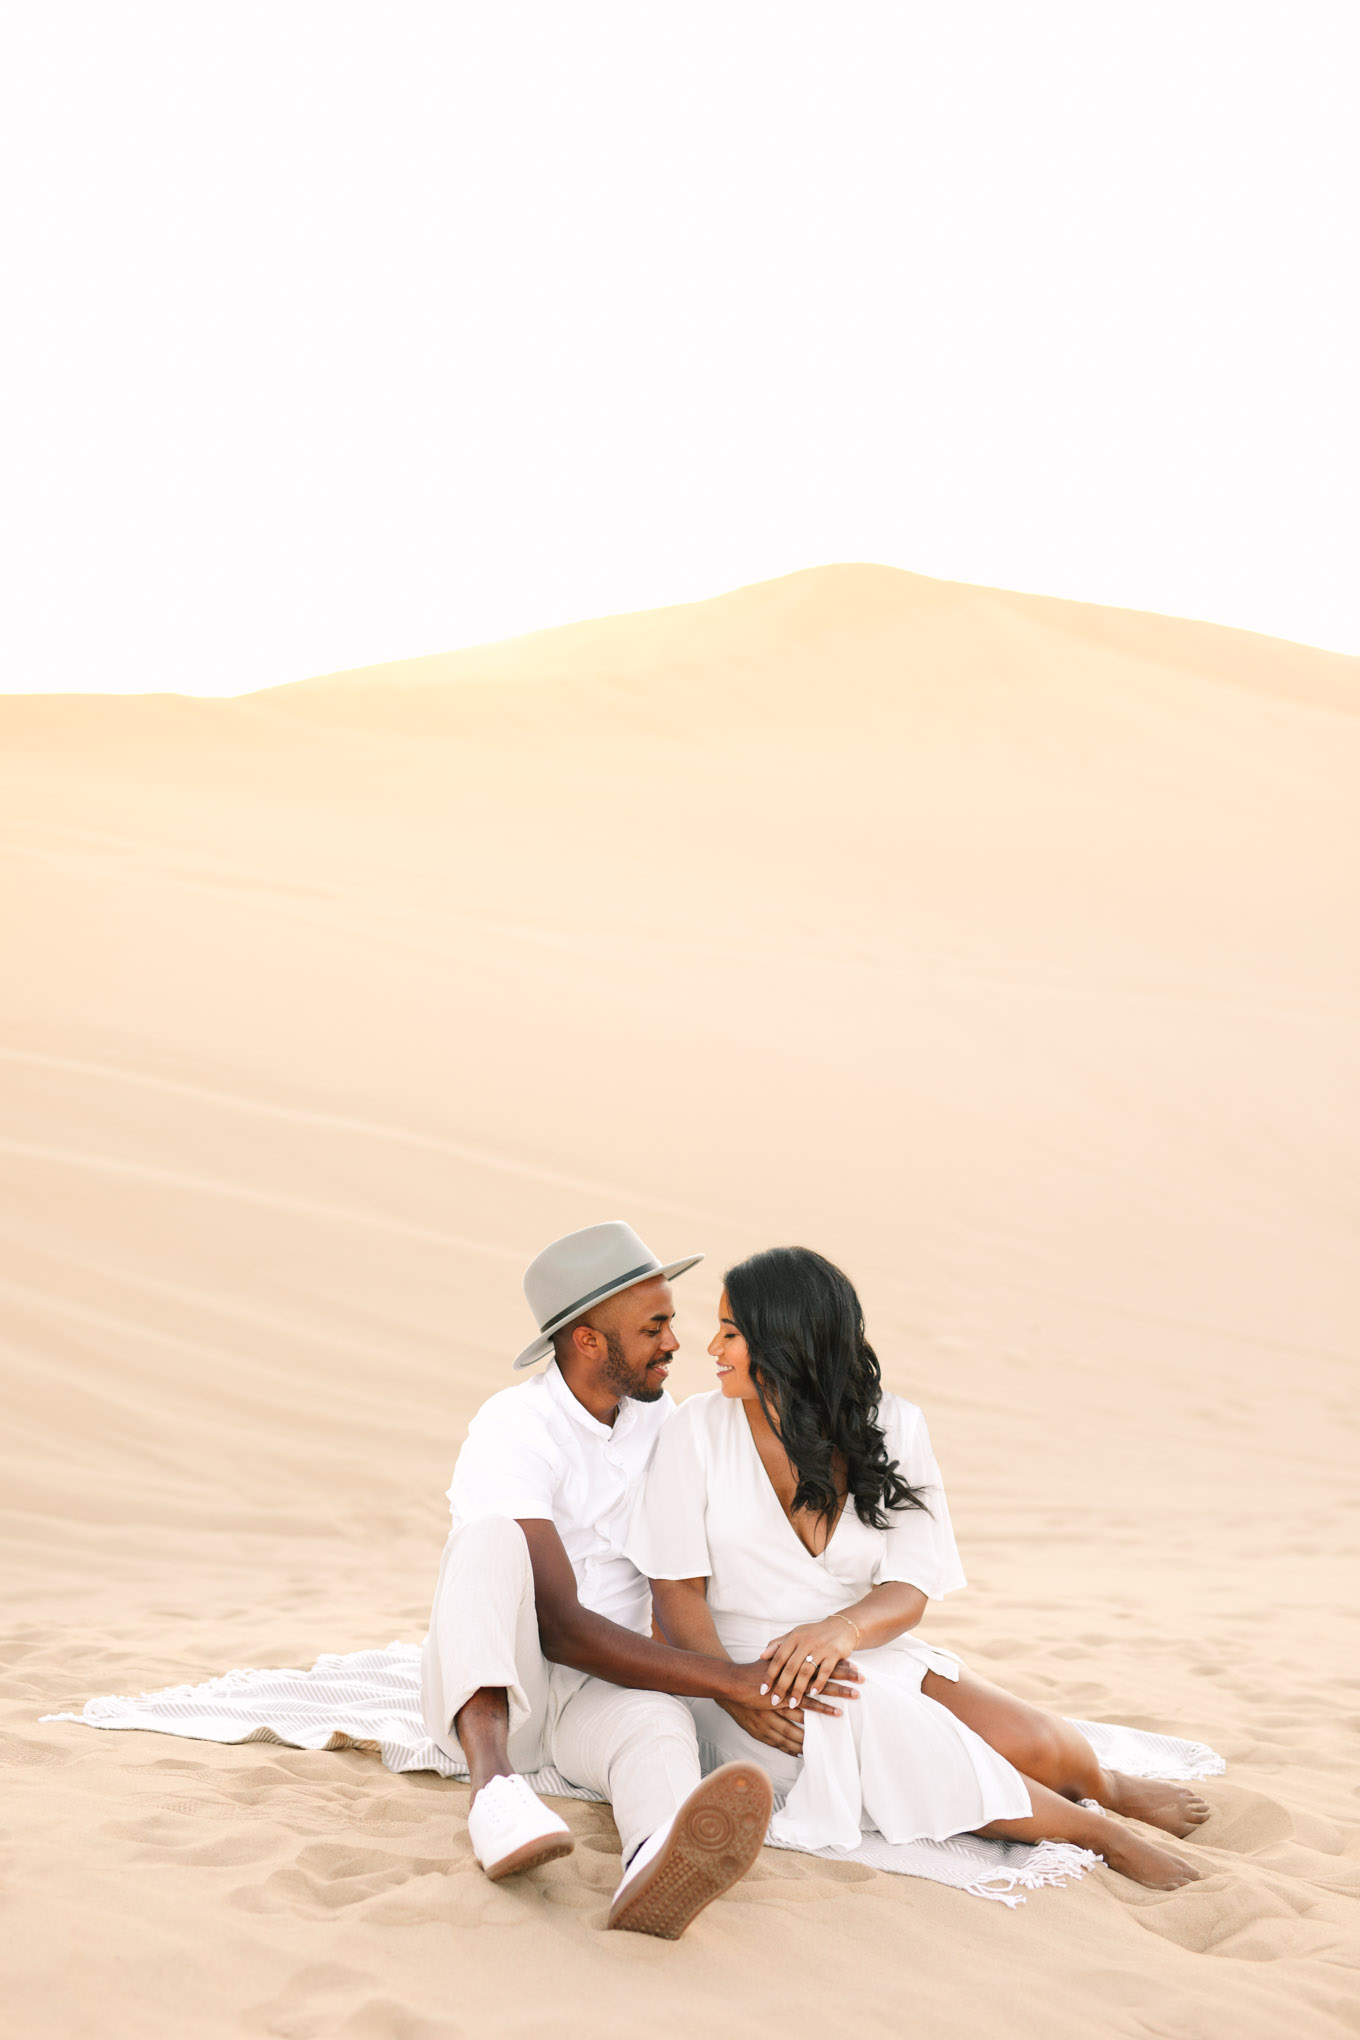 Engaged couple sitting on a blanket in the sand dunes | California Sand Dunes engagement session | Colorful Palm Springs wedding photography | #palmspringsphotographer #sanddunes #engagementsession #southerncalifornia  Source: Mary Costa Photography | Los Angeles